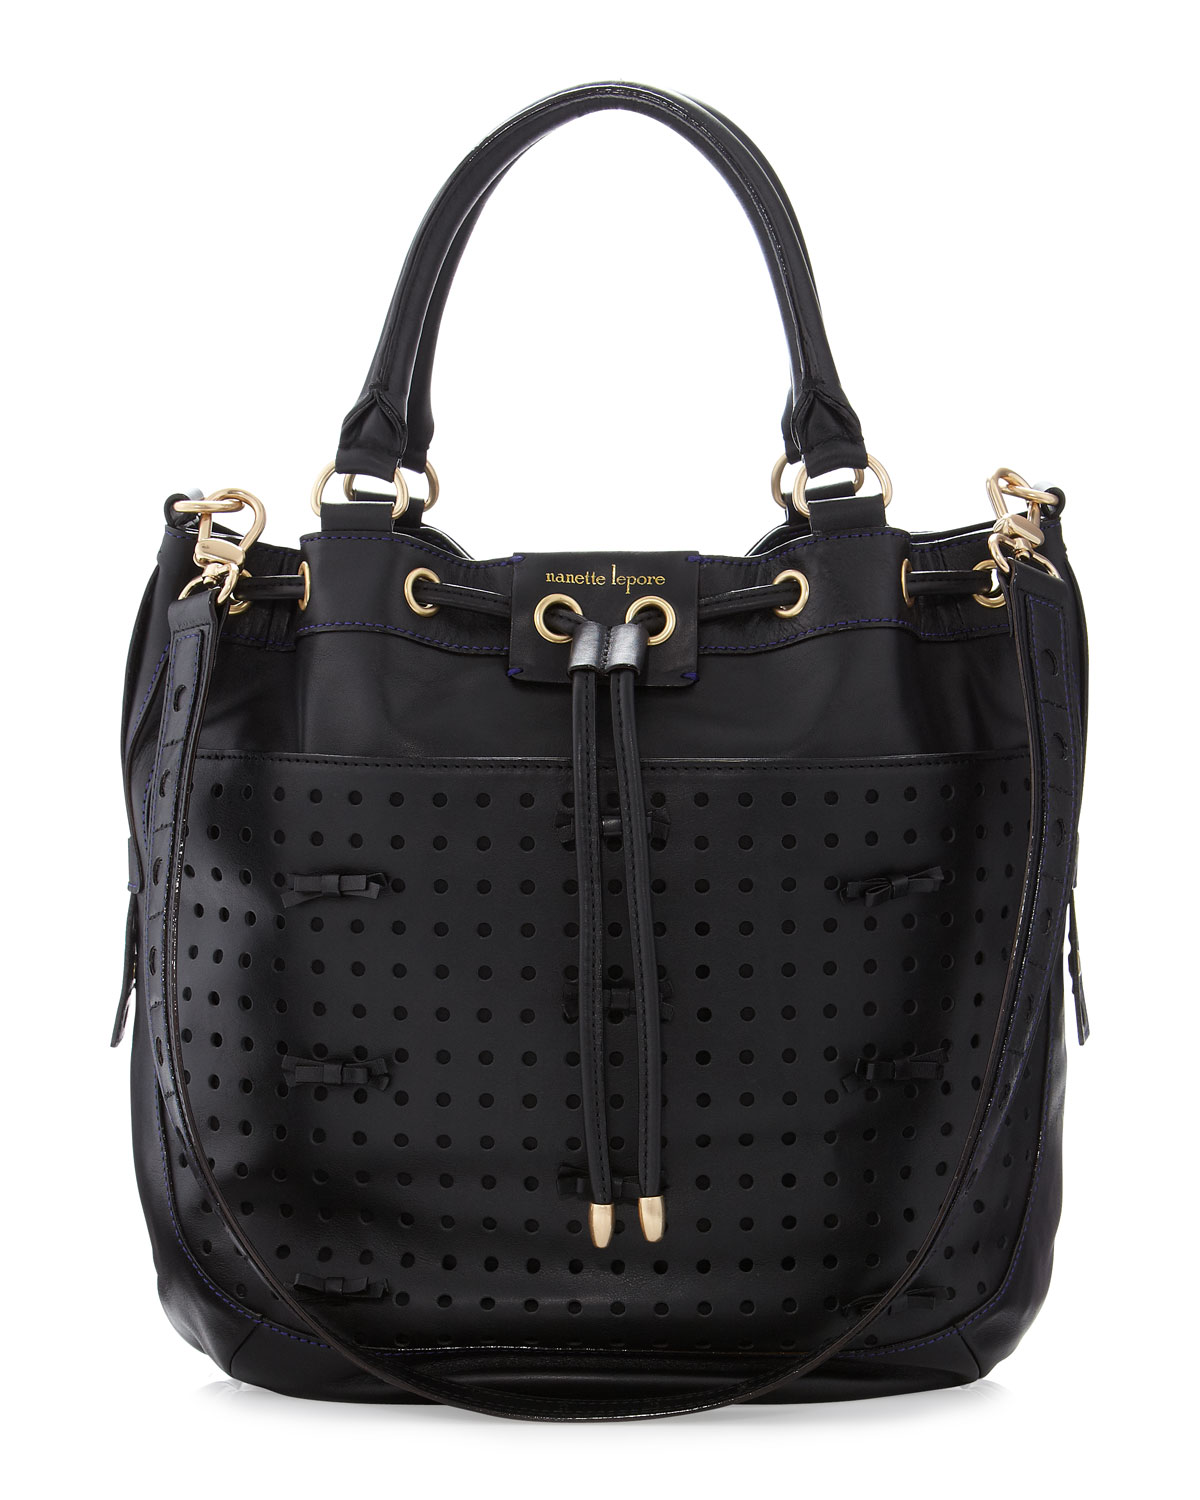 Nanette lepore Bow Perforated Drawstring Tote in Black | Lyst